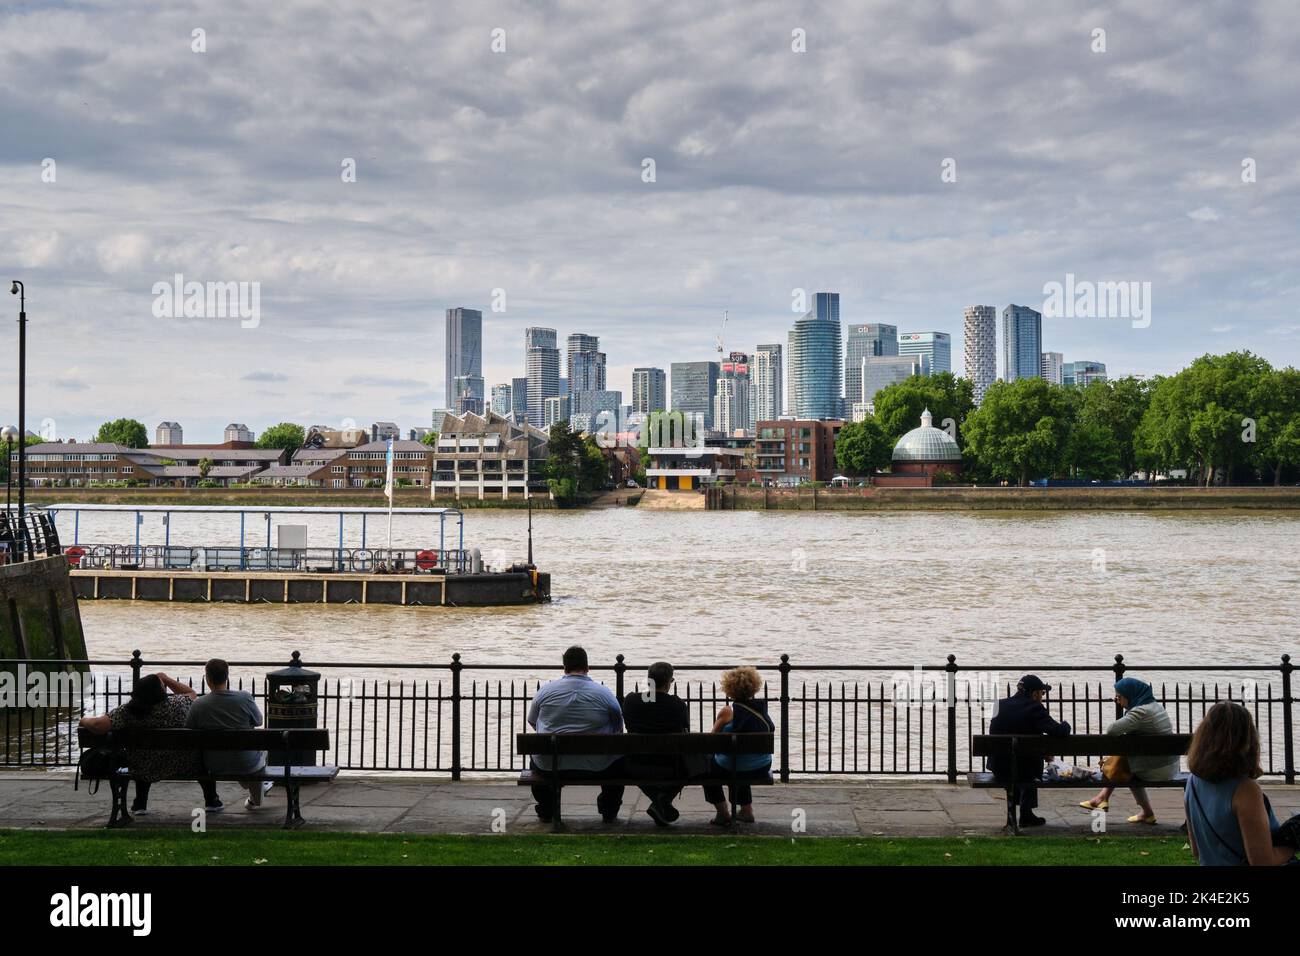 On a warm late spring day, some people sit on the benches along the Thames side in Greenwich. In background Canary Wharf skyline landscape. Stock Photo